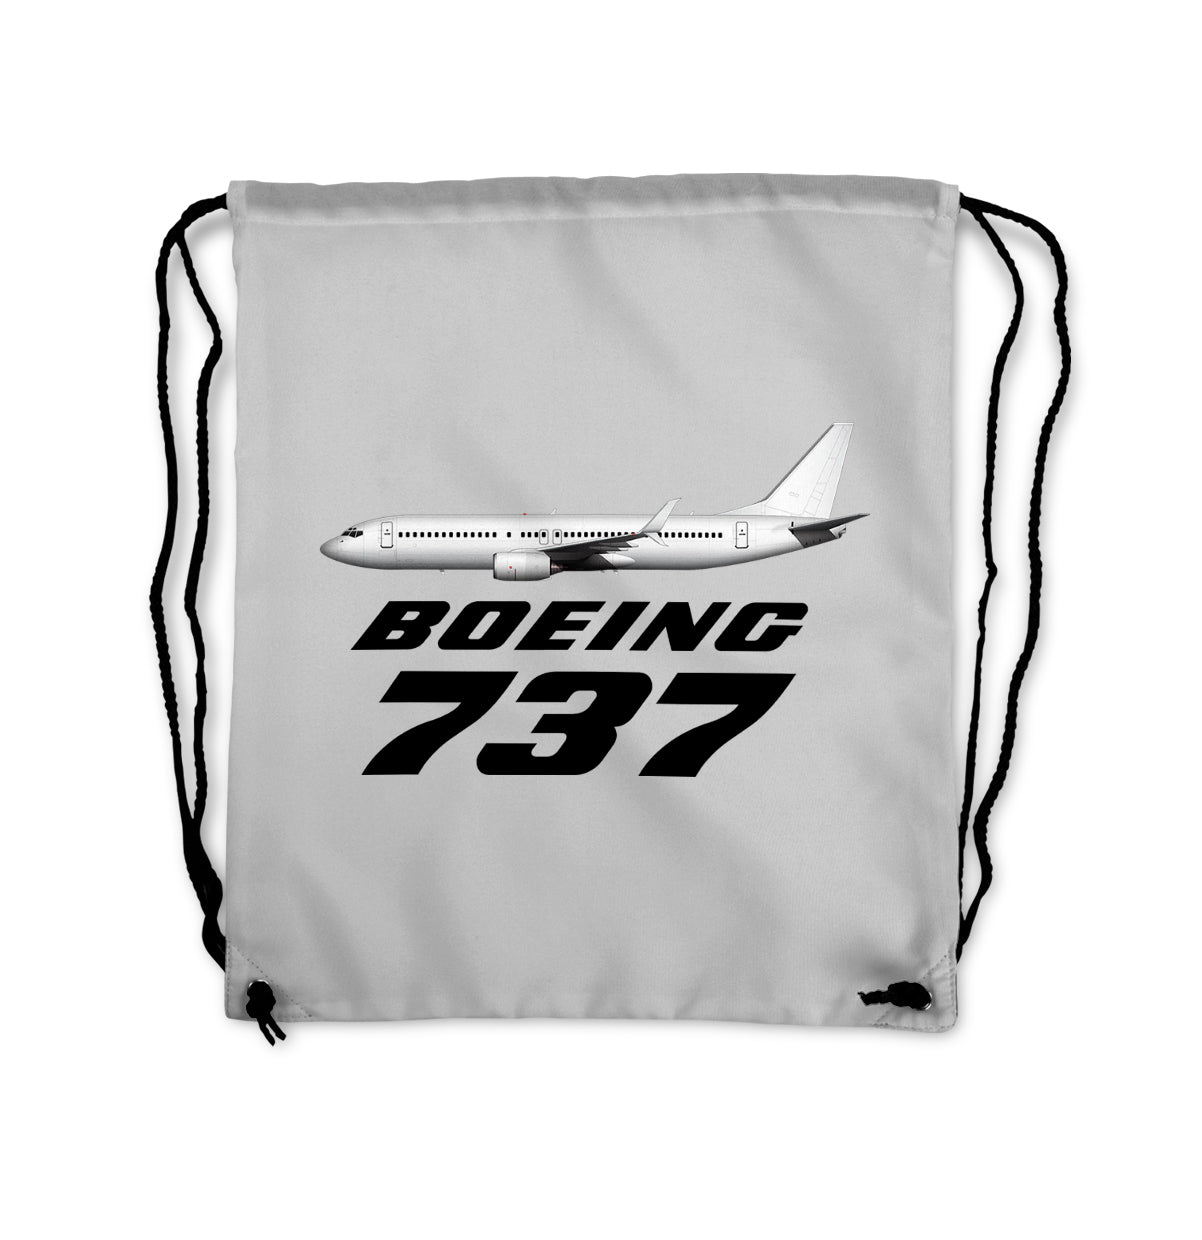 The Boeing 737 Designed Drawstring Bags